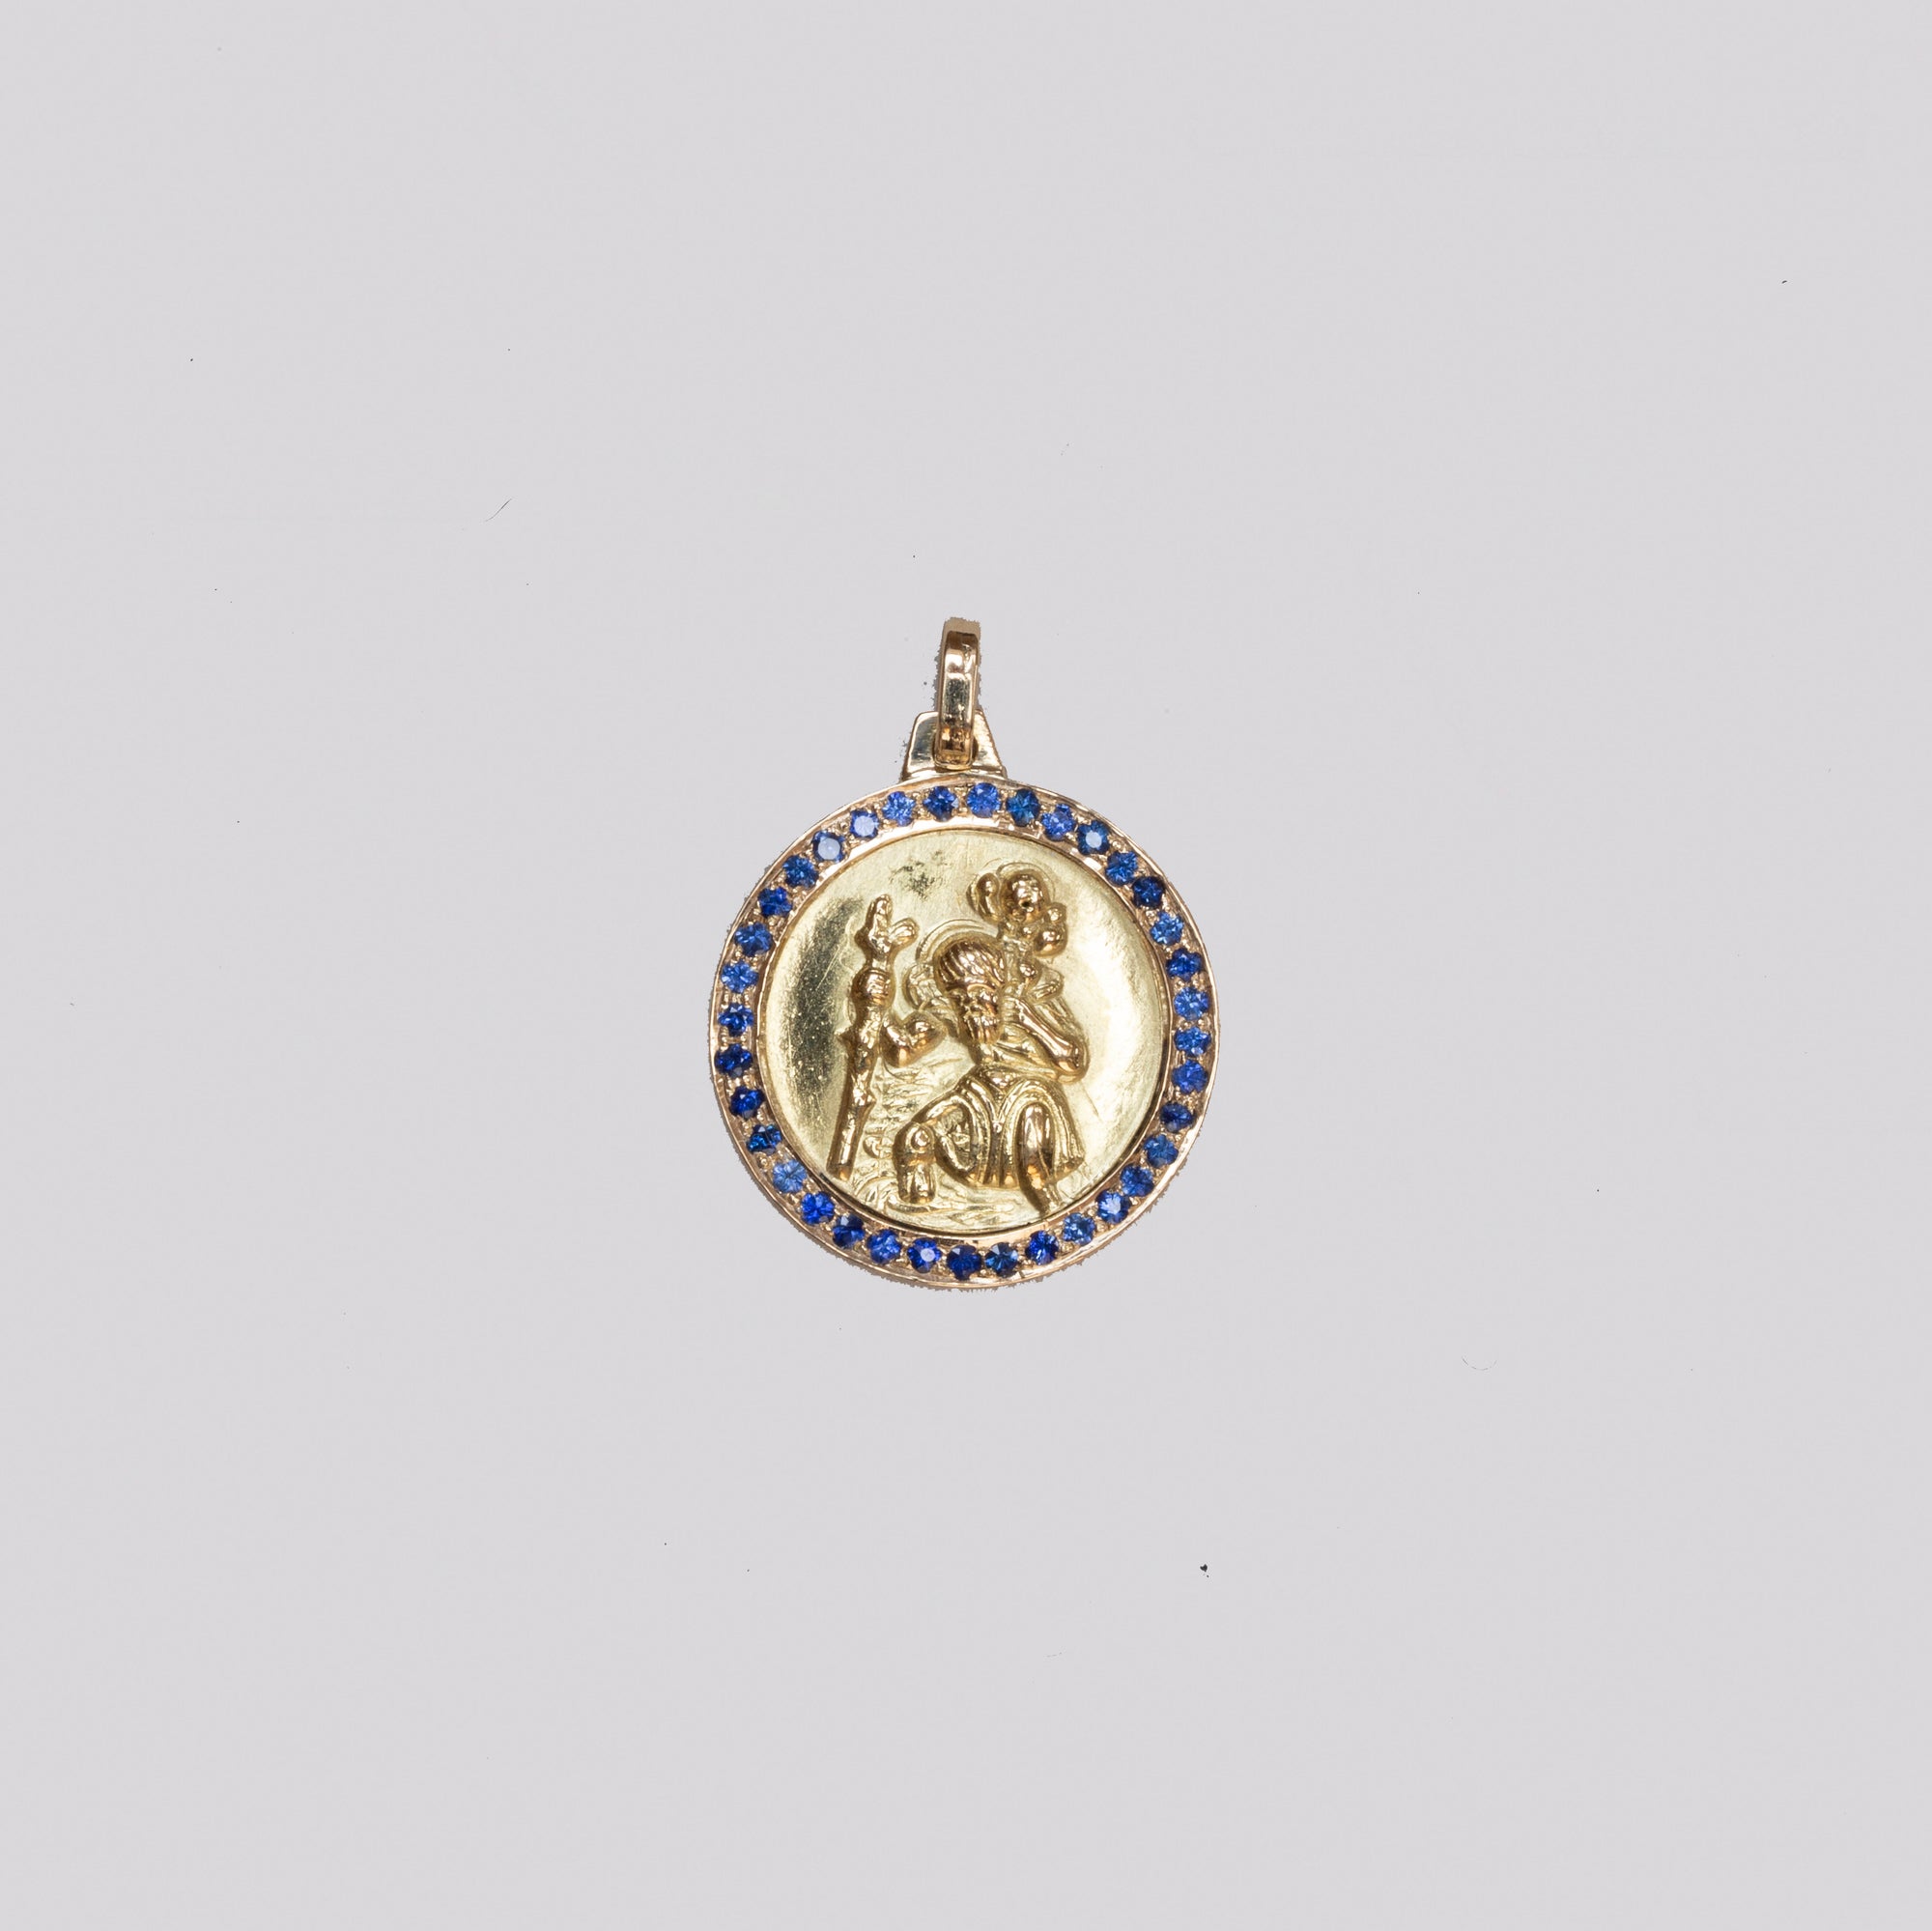 Vintage 9ct Gold St. Christopher Charm Pendant with Sapphires